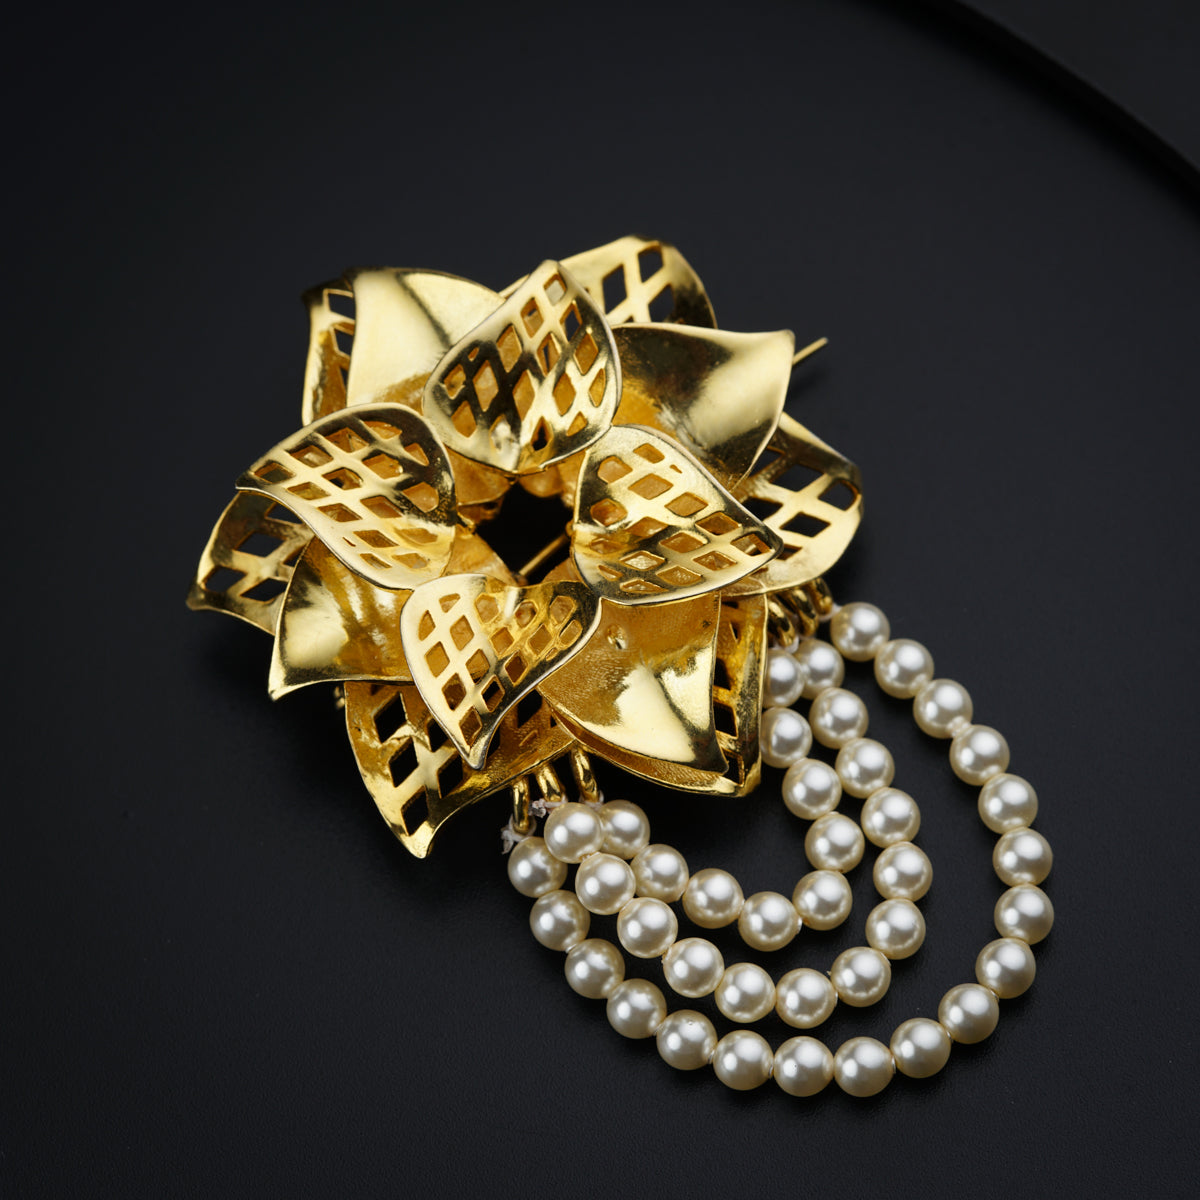 a golden brooch with pearls on a black surface